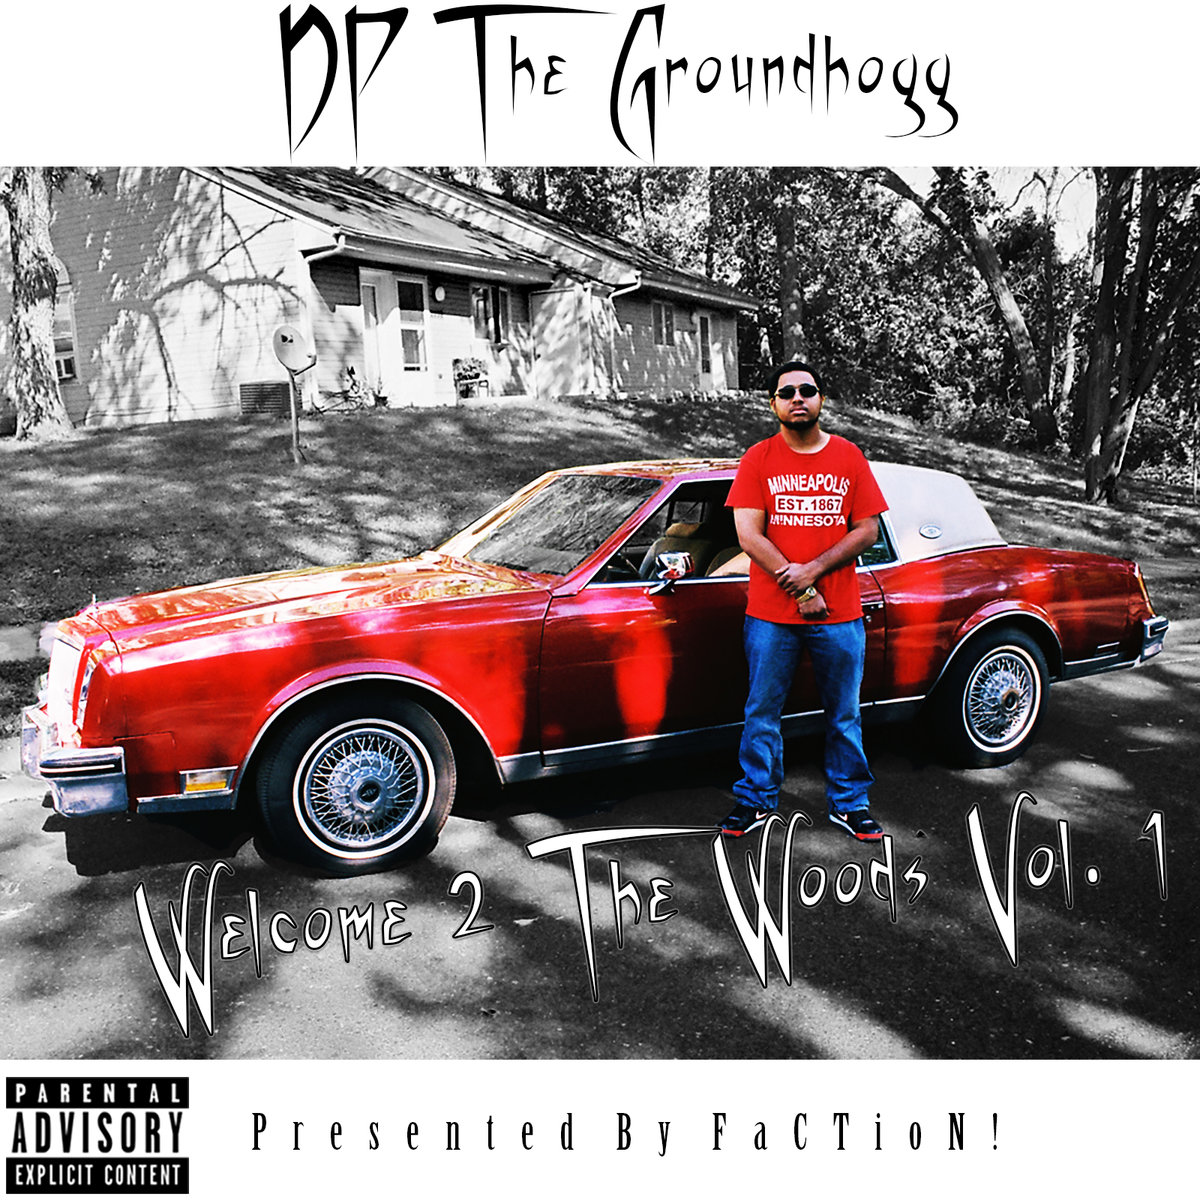 DP the Groundhogg - Welcome 2 the Woodz Vol 1 (Album)